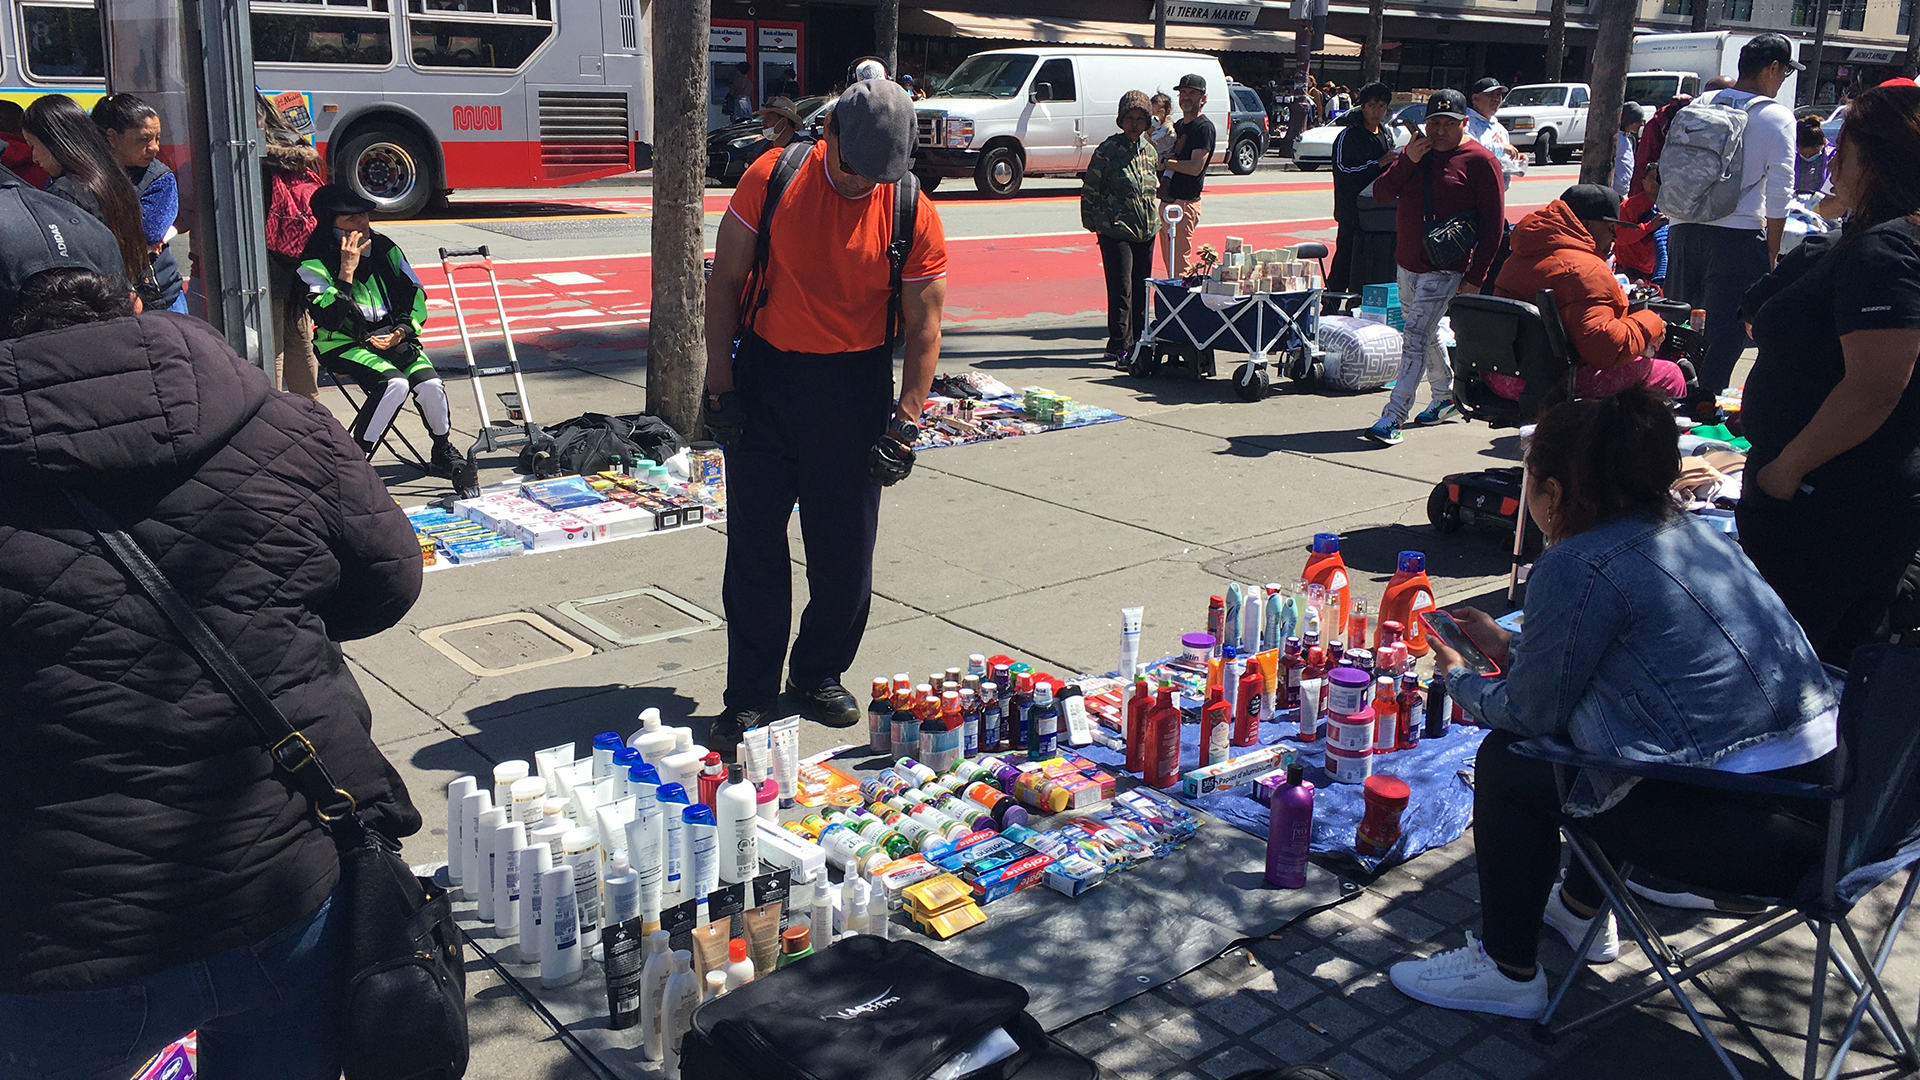 A blanket laid out on Market Street in San Francisco has shampoos, soaps, and other toiletries neatly lined up.